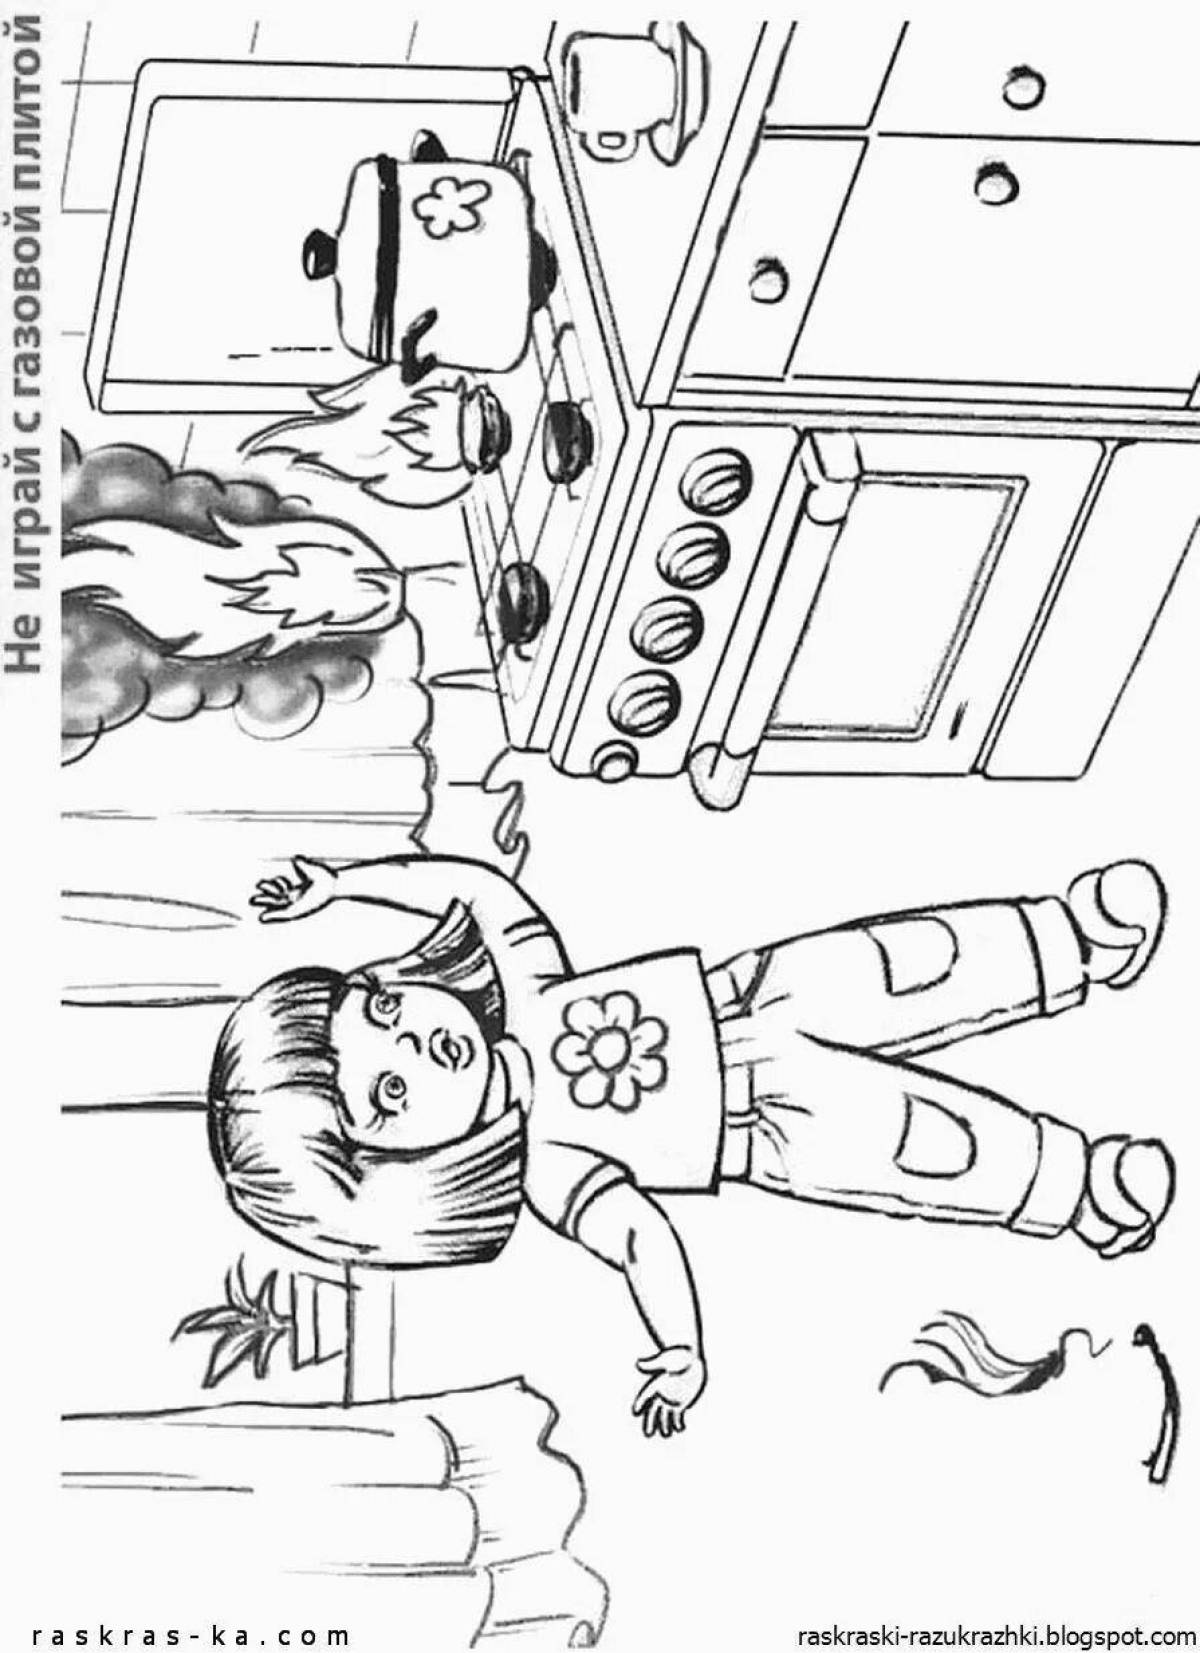 Coloring book glowing fire safety rules